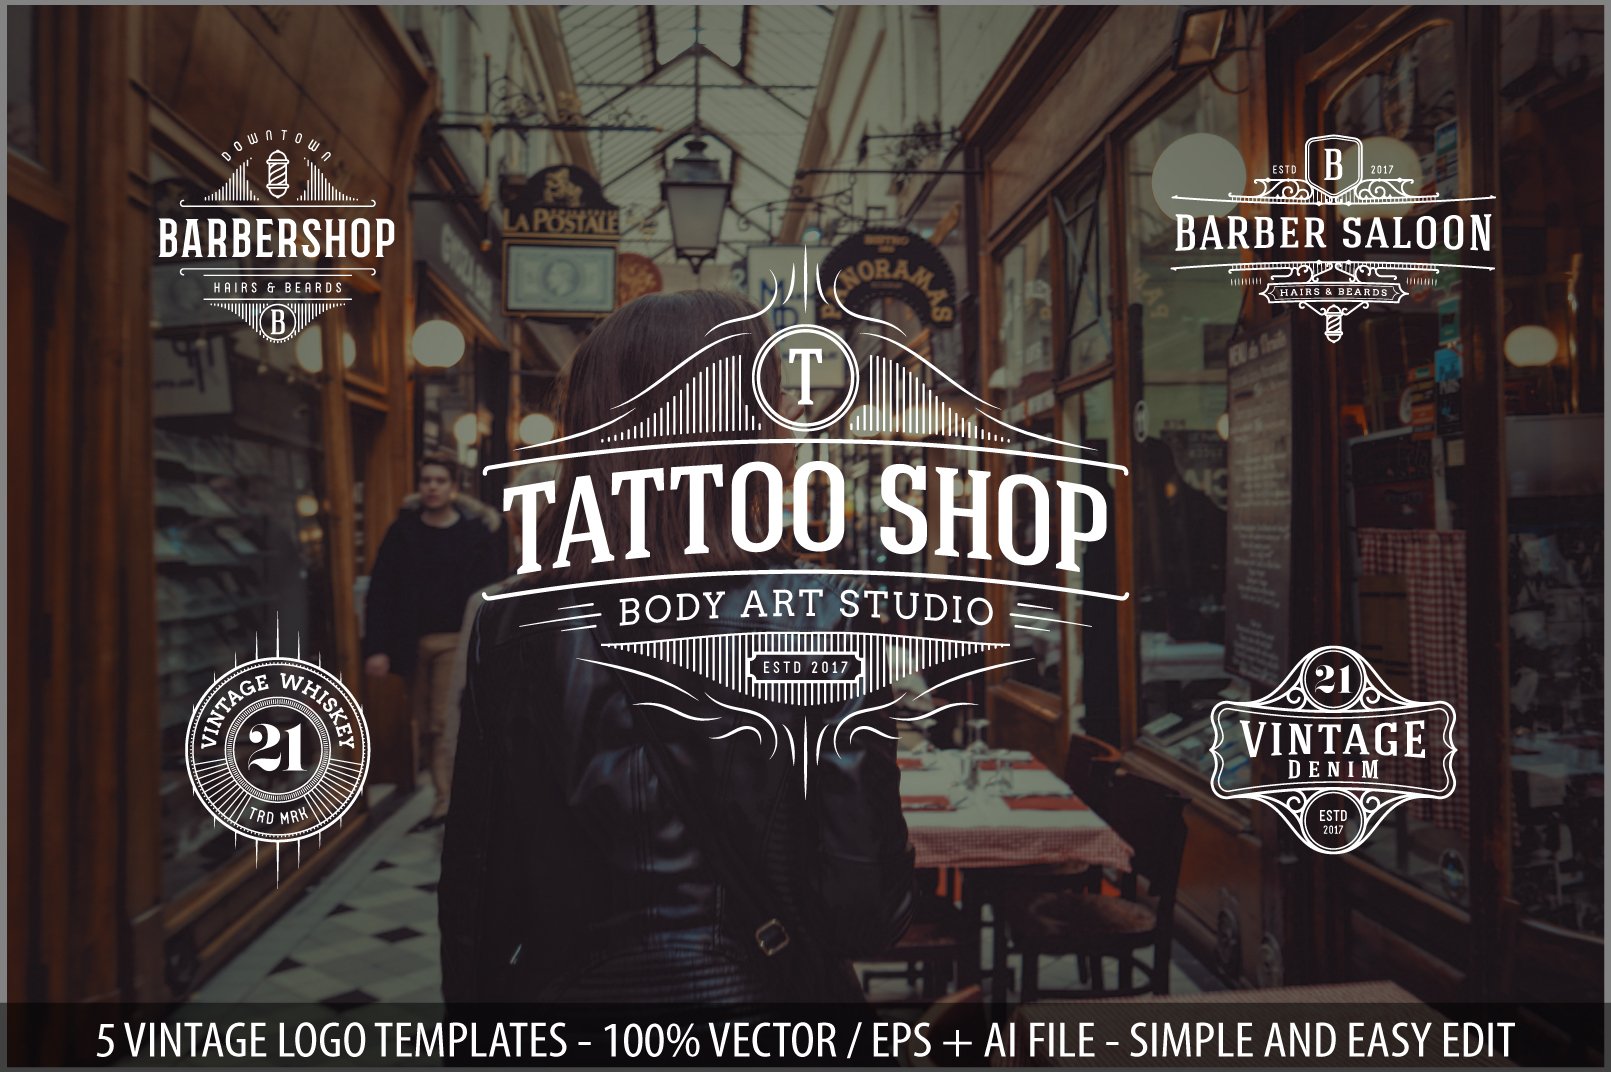 Cool vintage logos for old school tattoo.